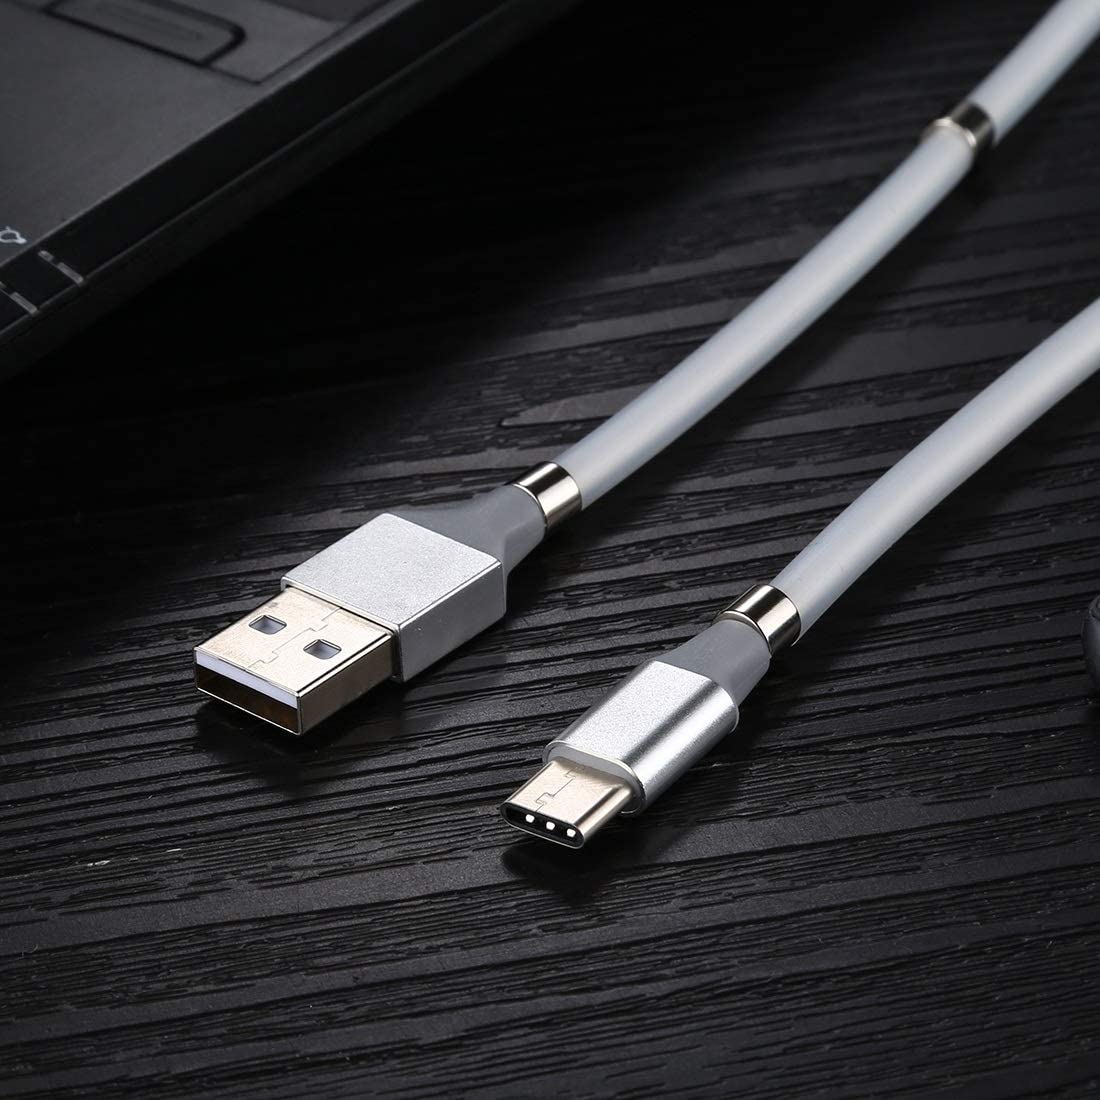 USB C Type C Magnetic Attraction CABLE%201399%20(27)%20(Copy)